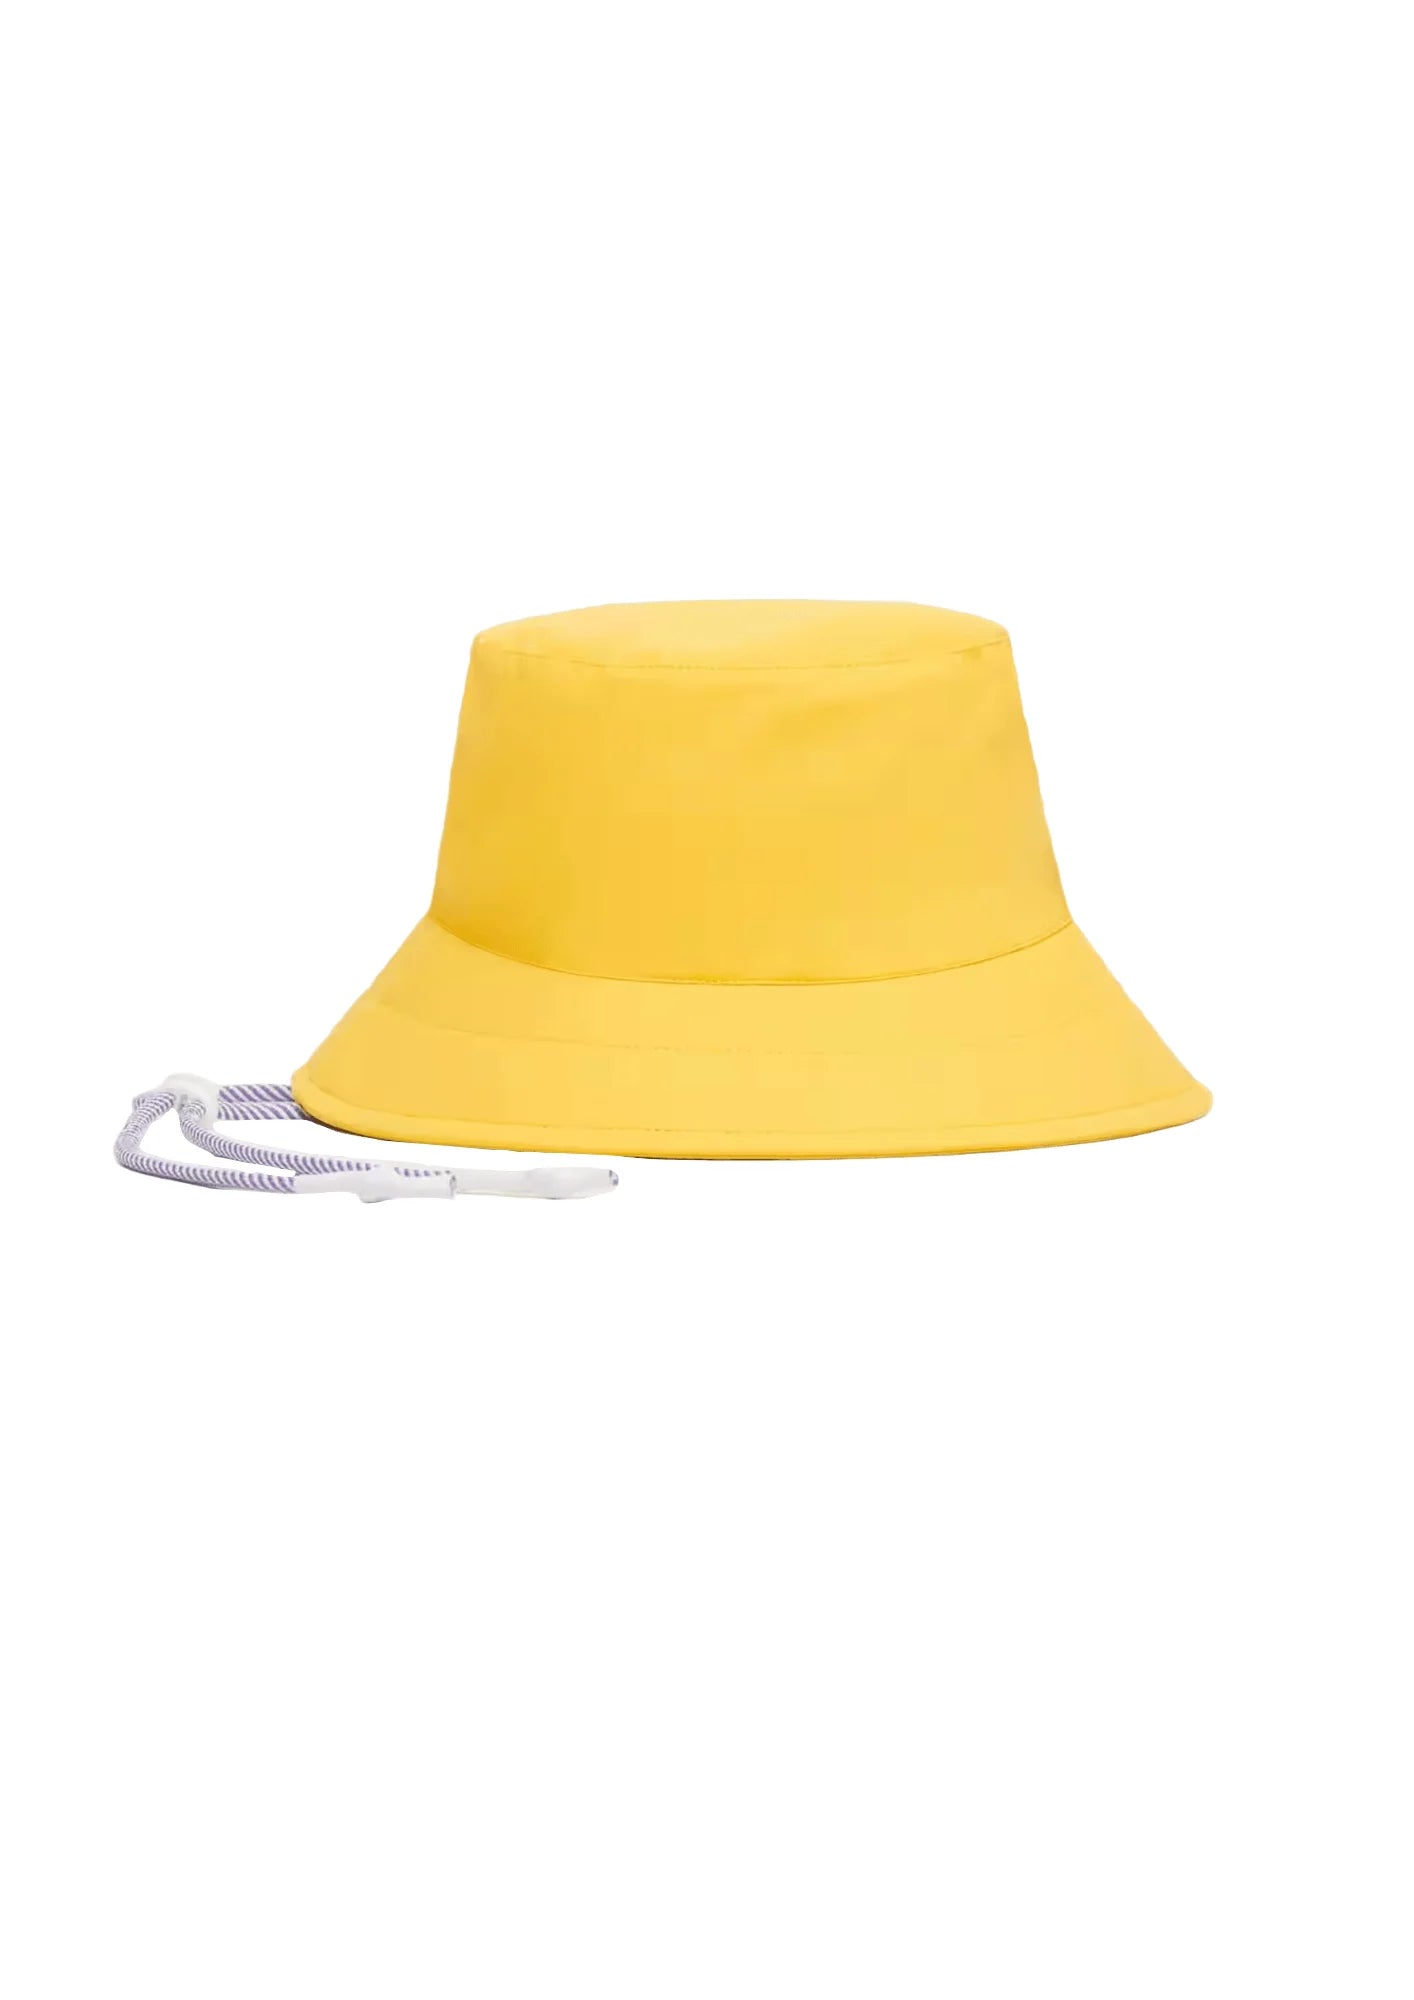 YELLOW BUCKET HAT WITH STRAPS